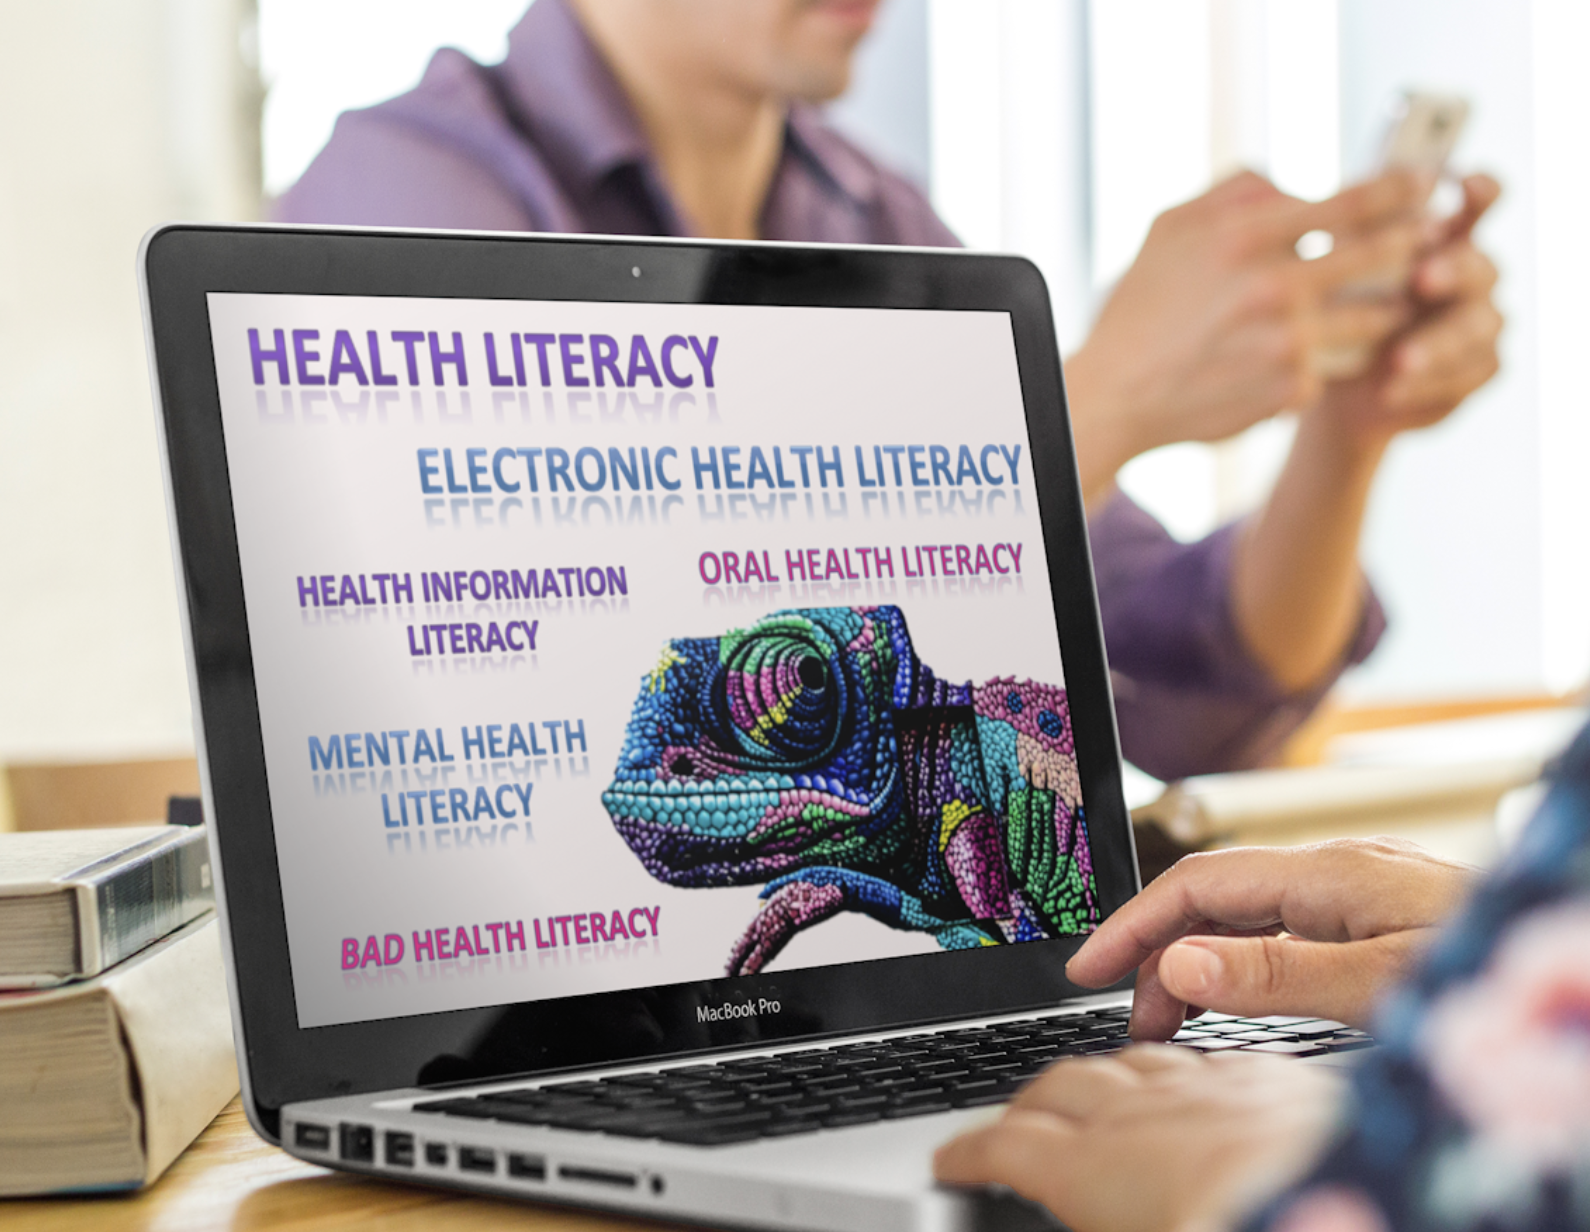 Laptop screen displaying the words Health Literacy